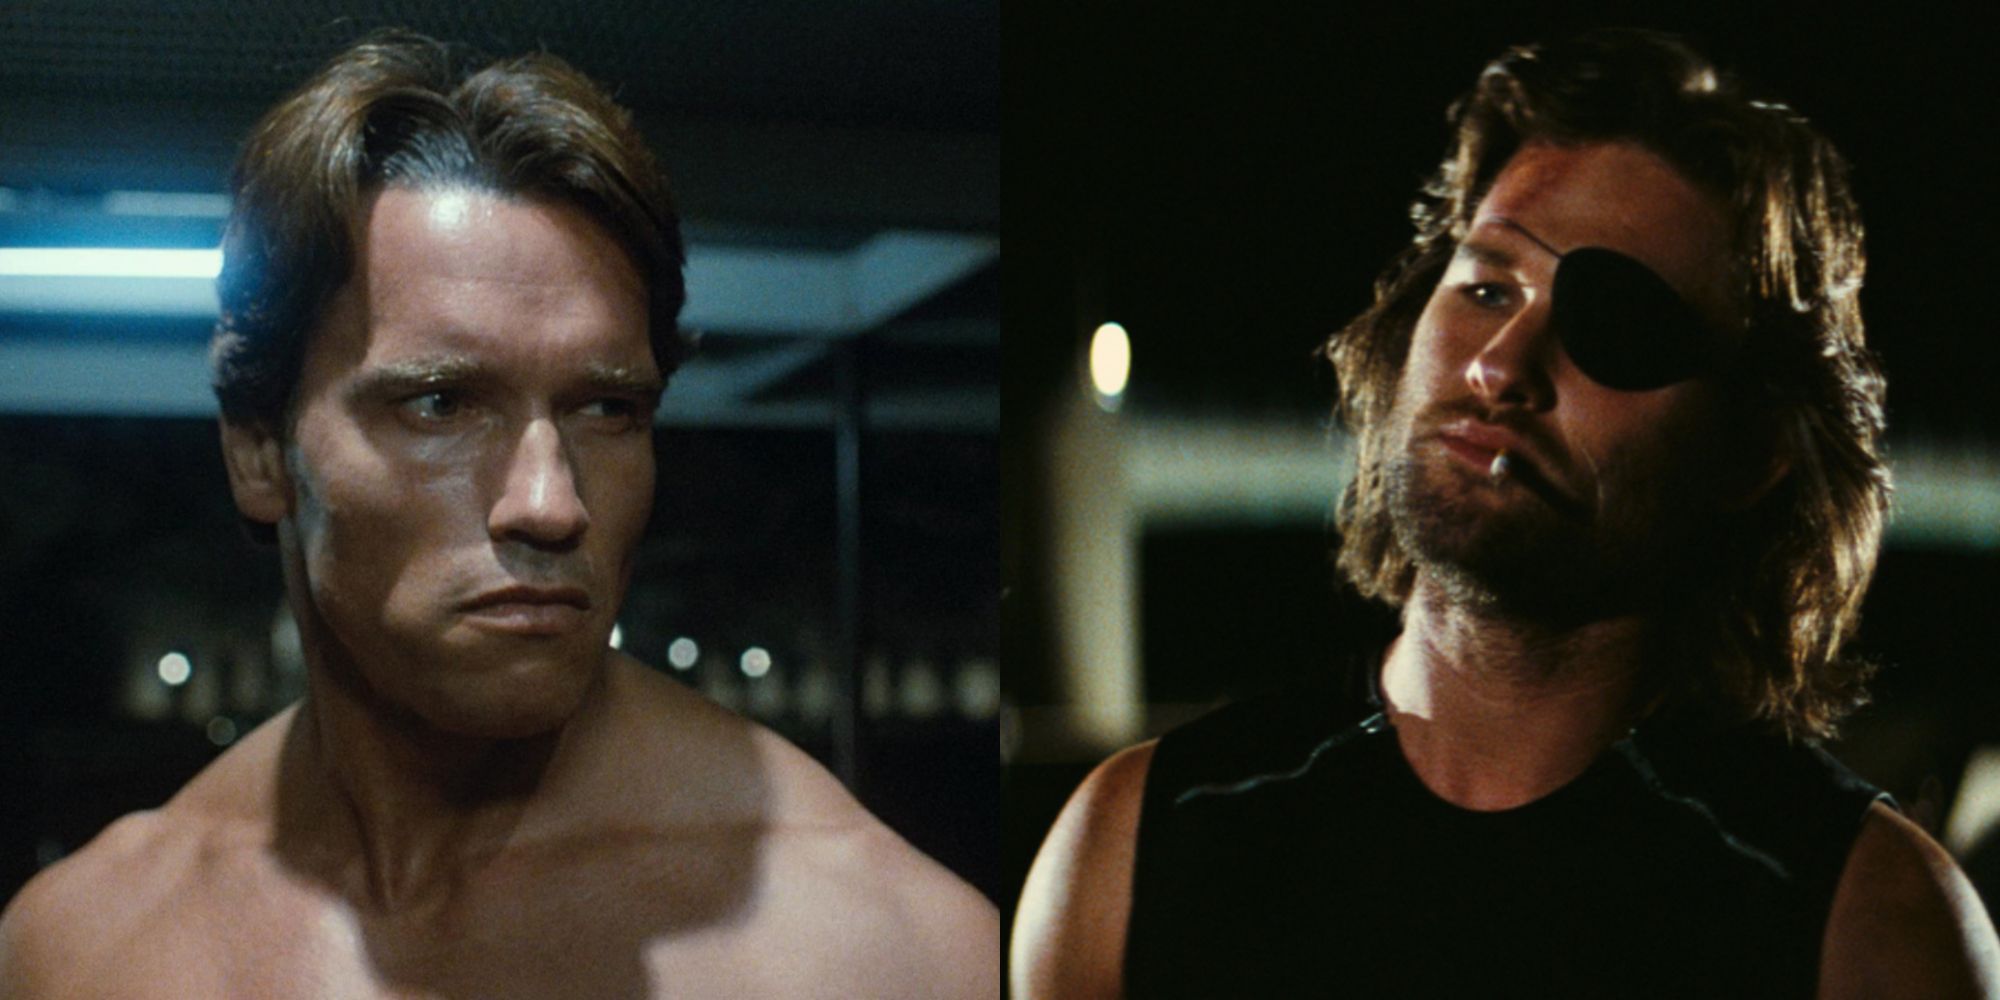 Split image showing the T800 in The Terminator and Snake in Escape from New York.